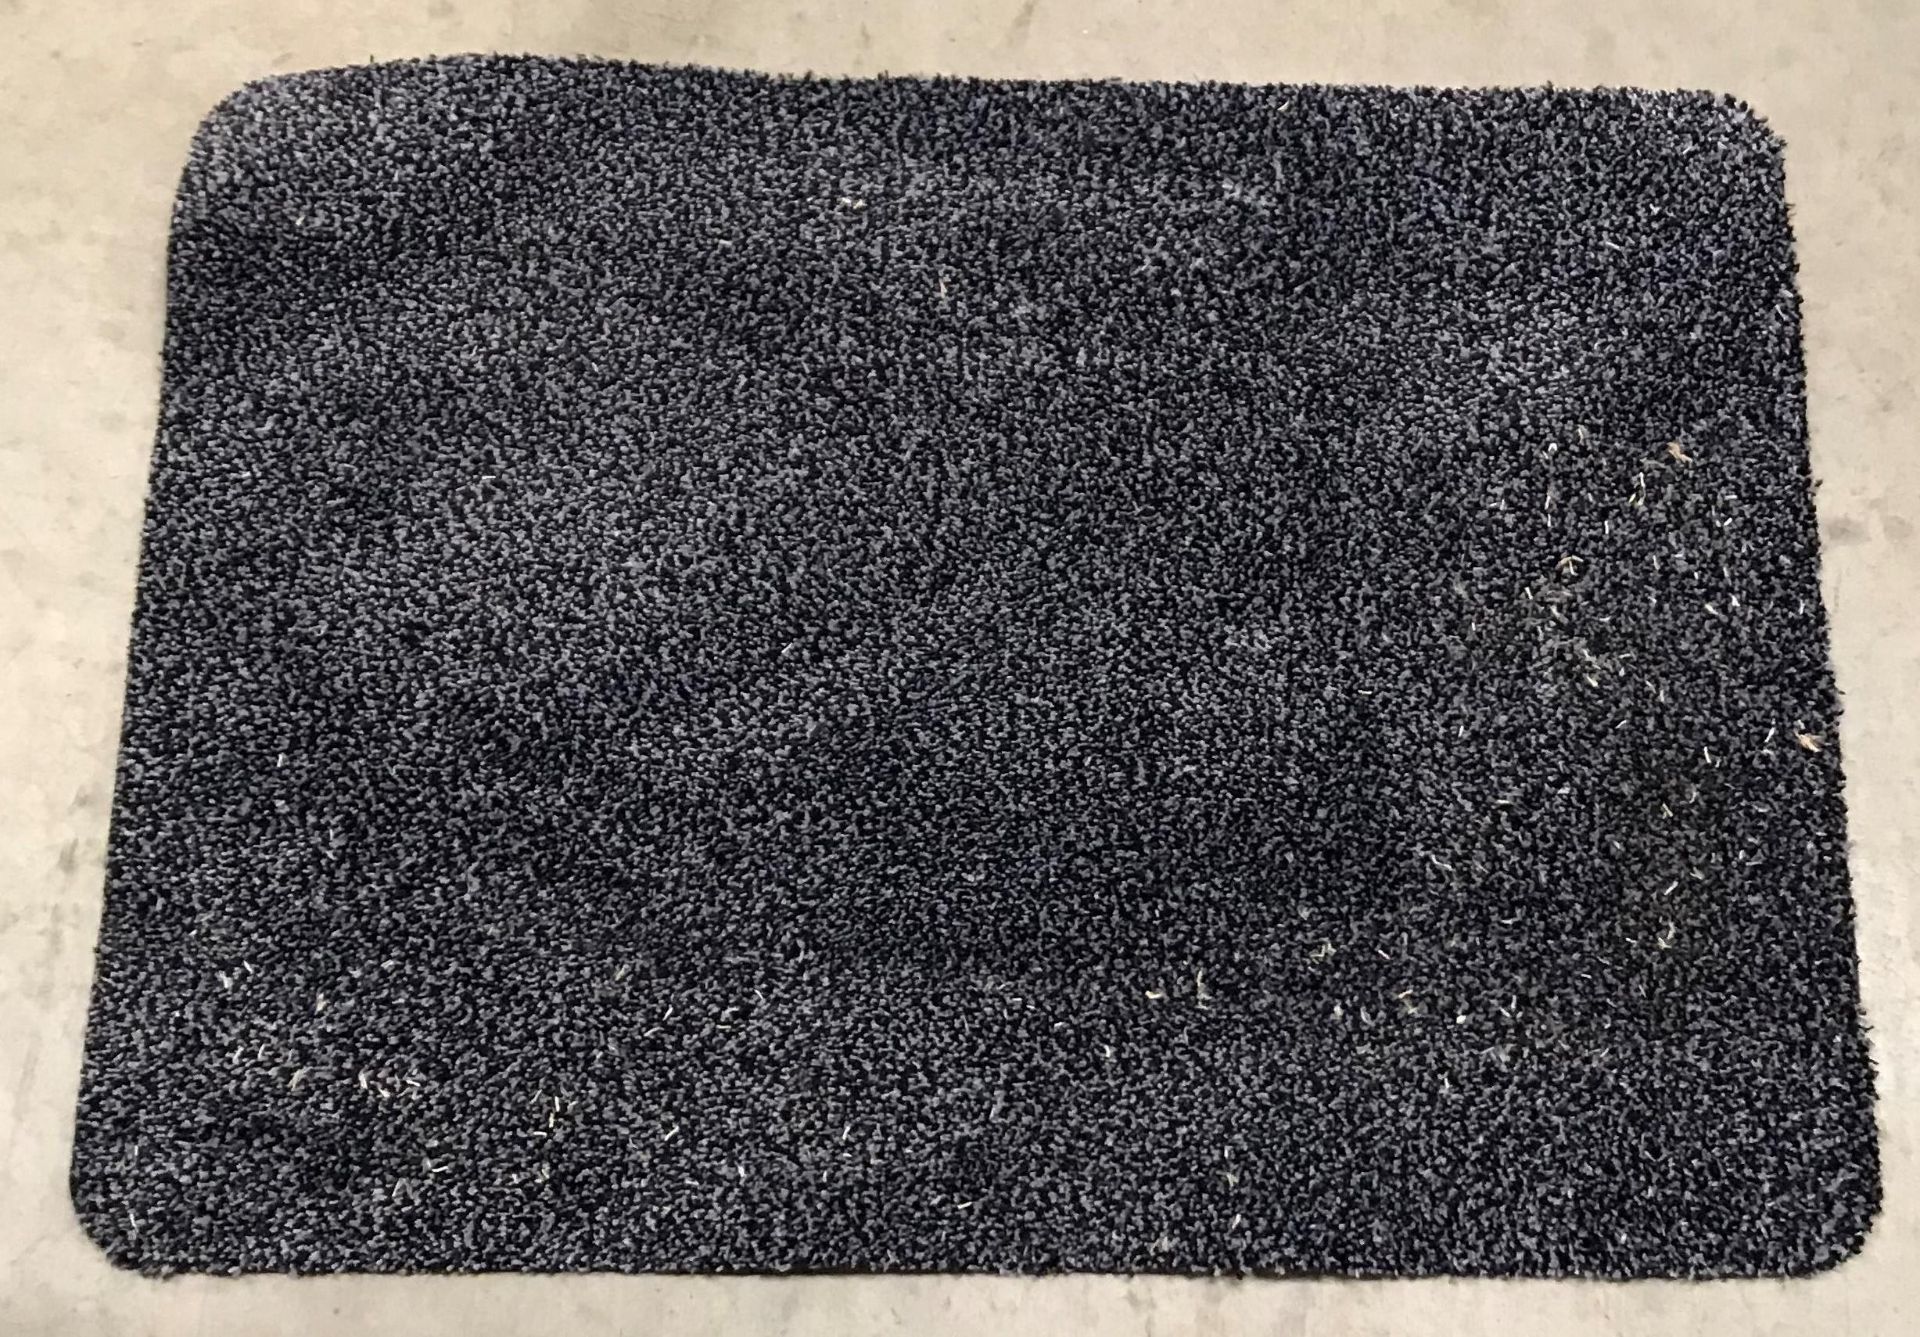 20 x black speckled rubber backed doormats - 60 x 80cm